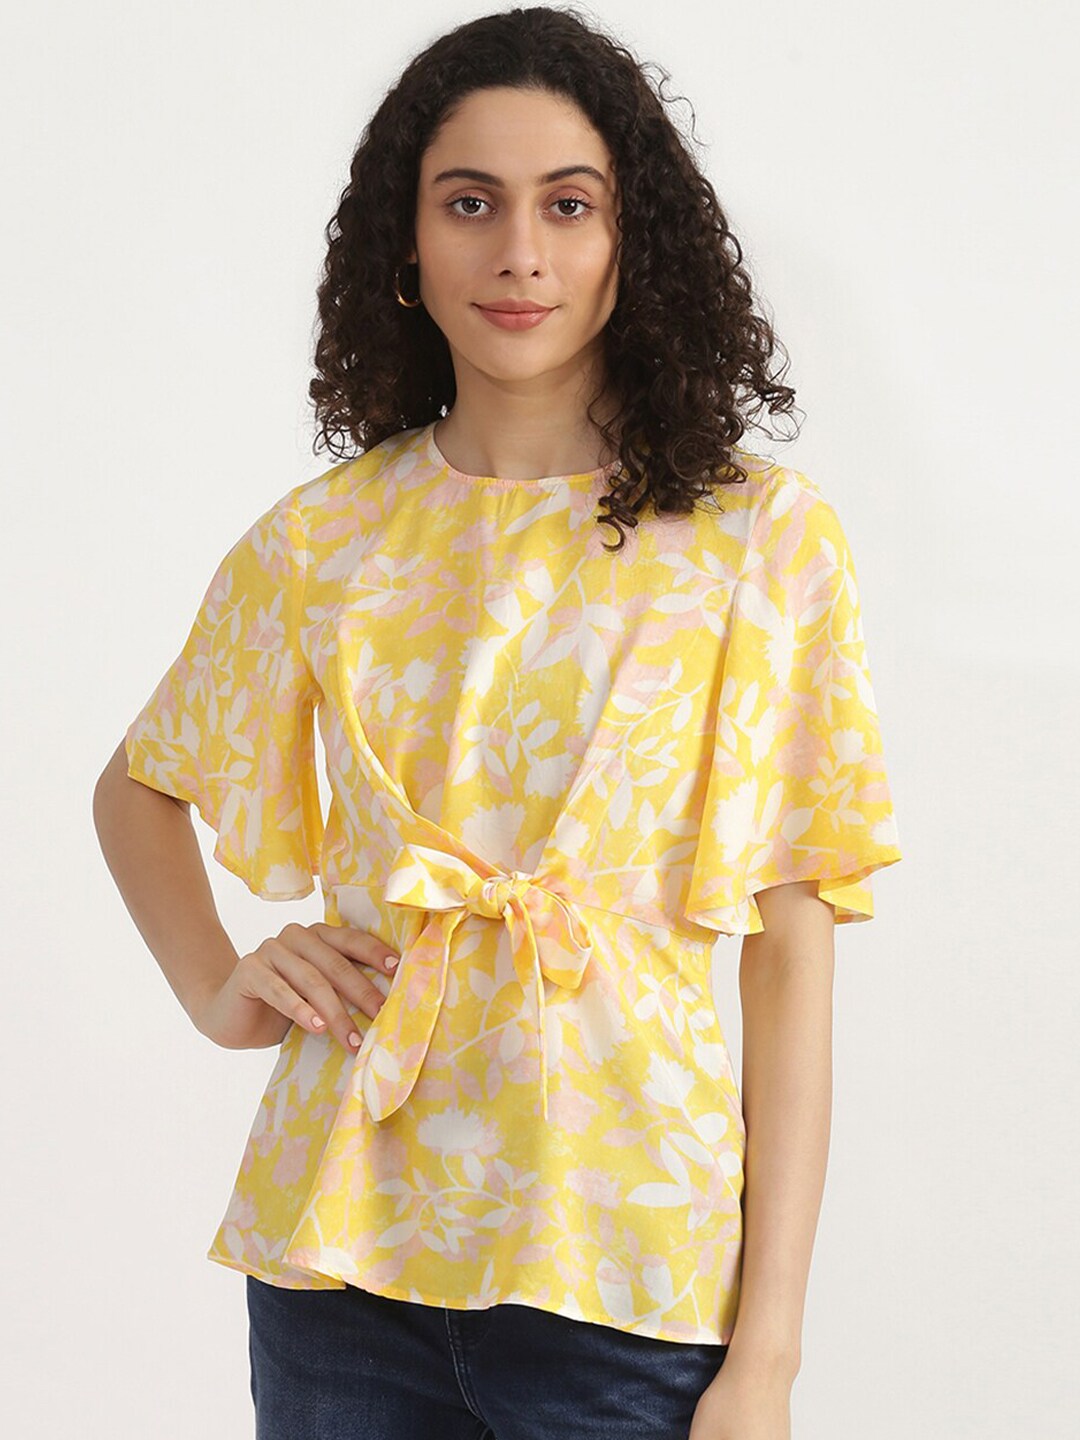 United Colors of Benetton Yellow & White Floral Print Cinched Waist Top Price in India